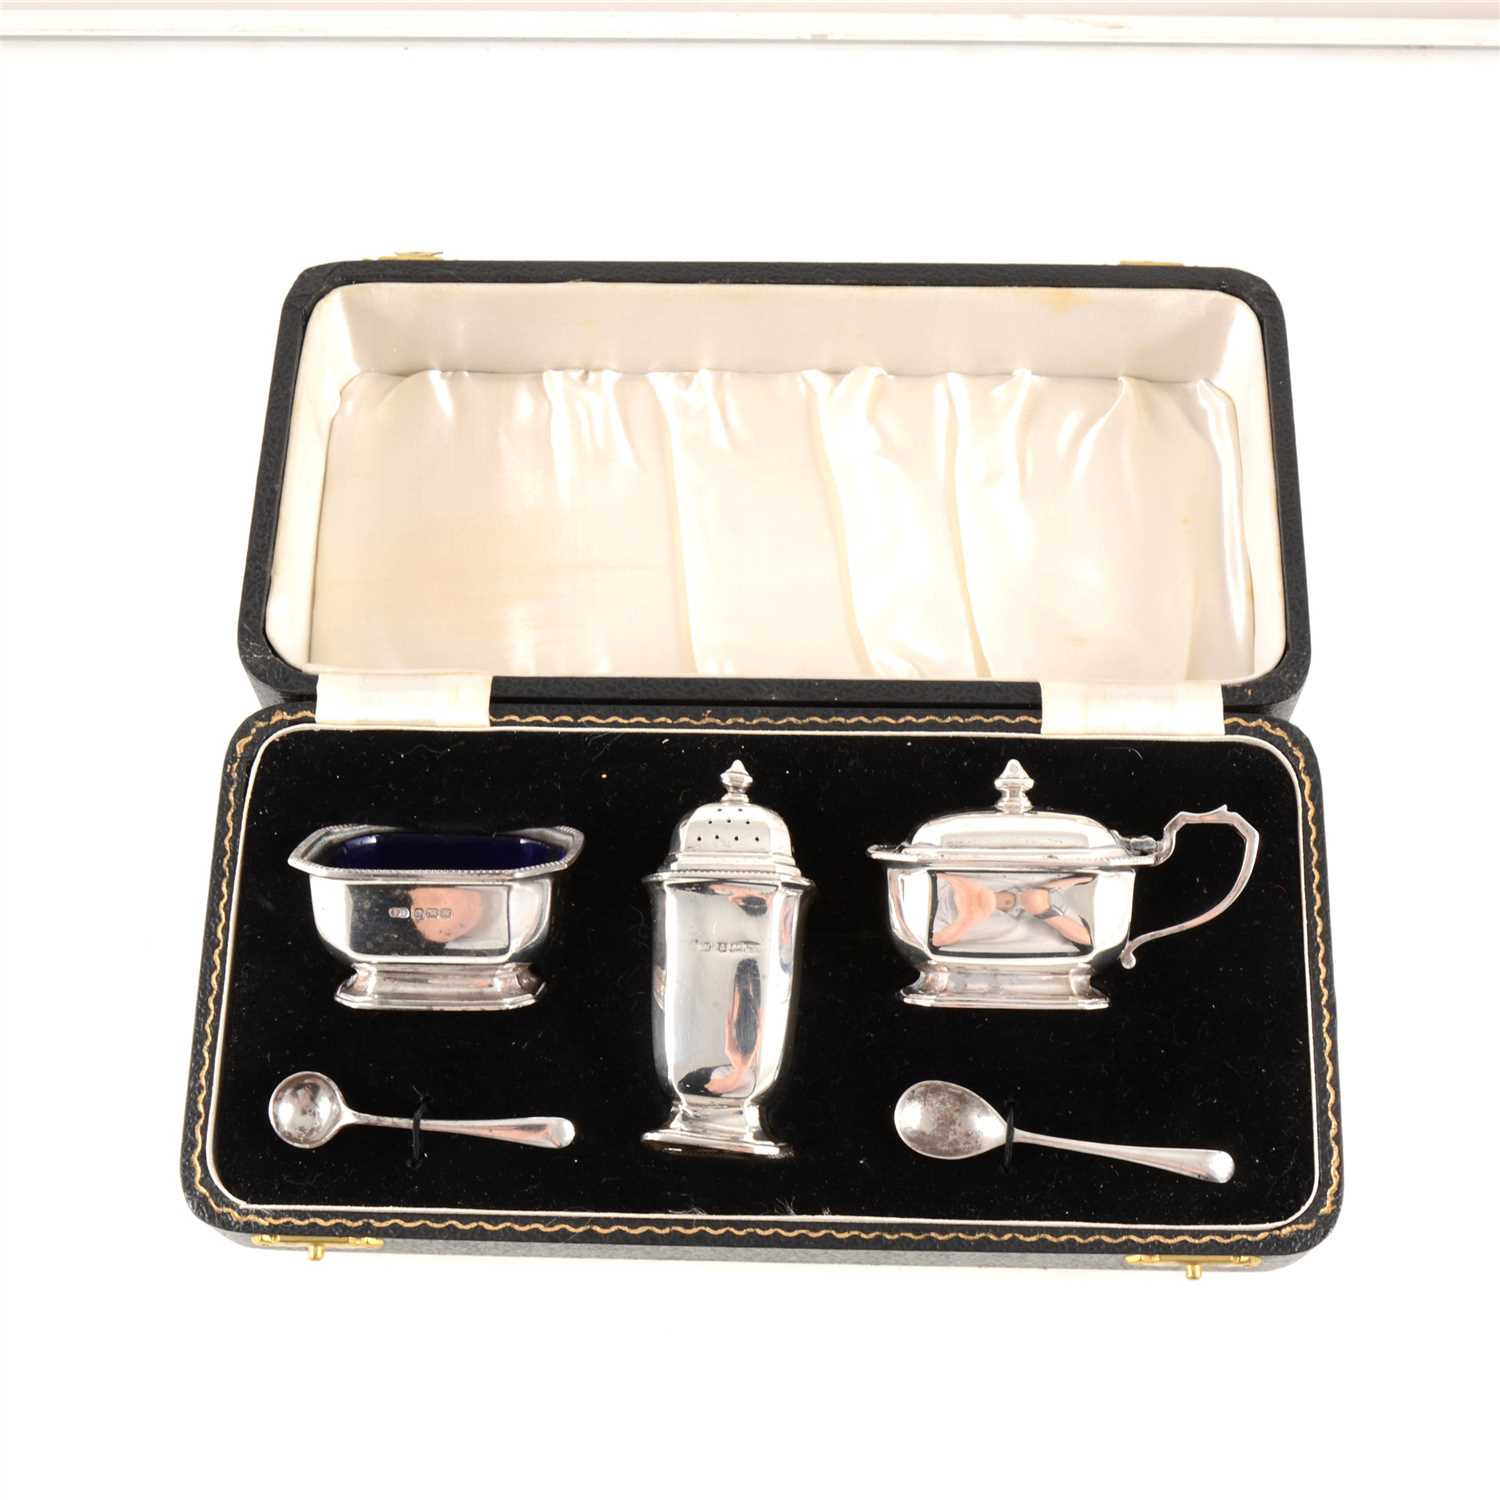 Lot 179 - A silver condiment set by William Suckling Ltd, Birmingham 1946, comprising salt with blue glass liner, pepperette and mustard, with two spoons, cased, weight approx. 3.7oz.